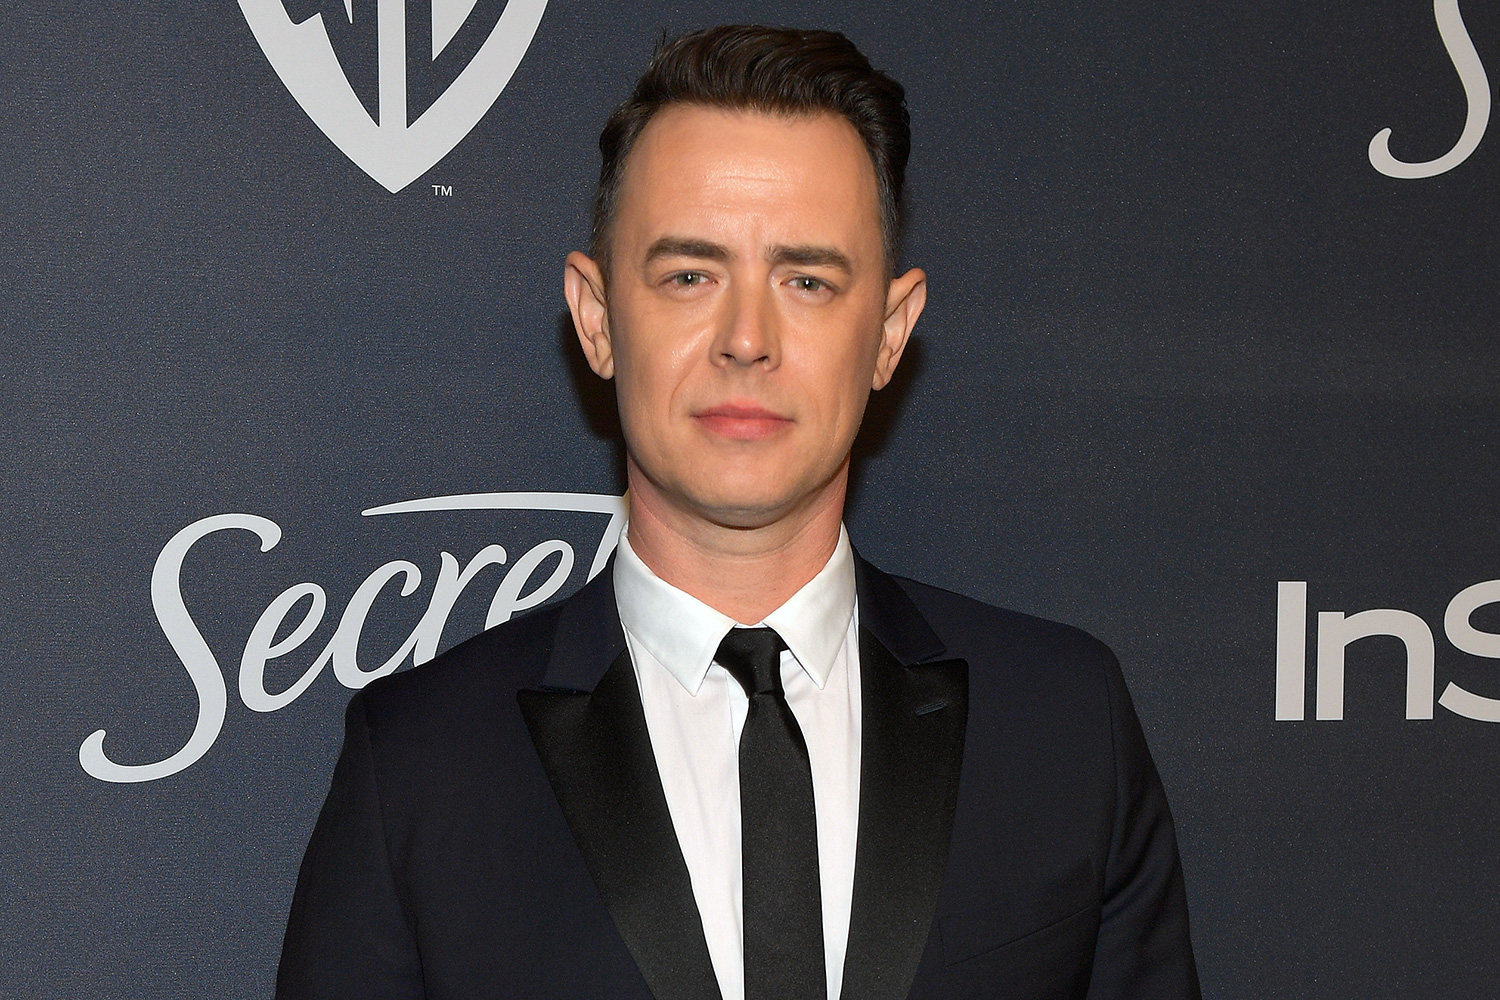 Colin Hanks attends The 2020 InStyle And Warner Bros. 77th Annual Golden Globe Awards Post-Party at The Beverly Hilton Hotel on January 05, 2020 in Beverly Hills, California.